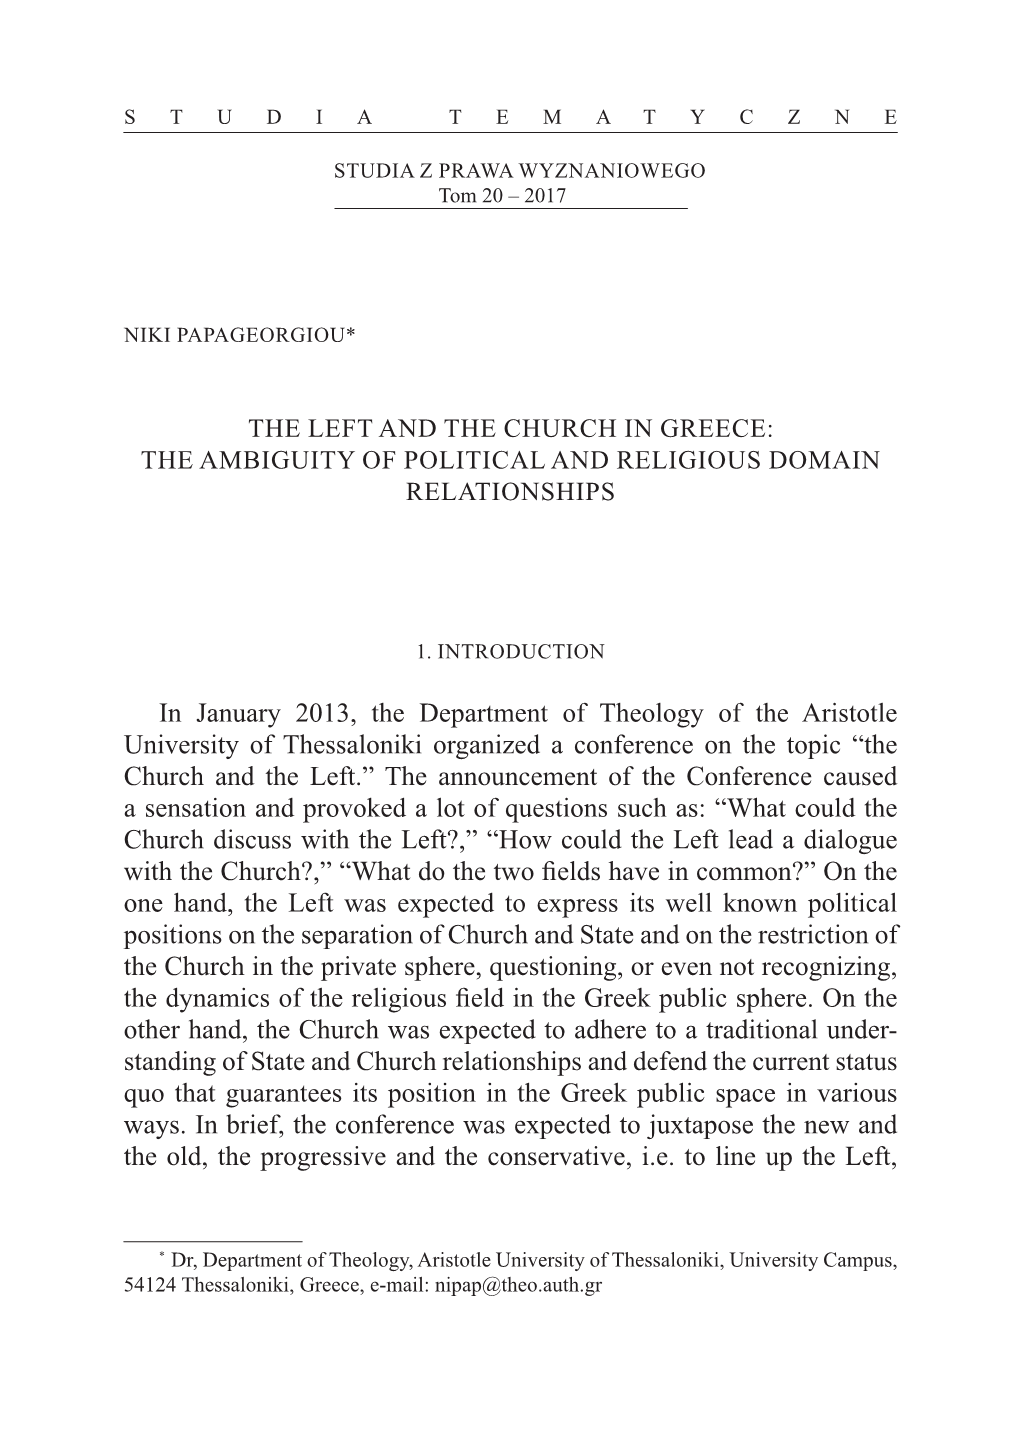 The Left and the Church in Greece: the Ambiguity of Political and Religious Domain Relationships